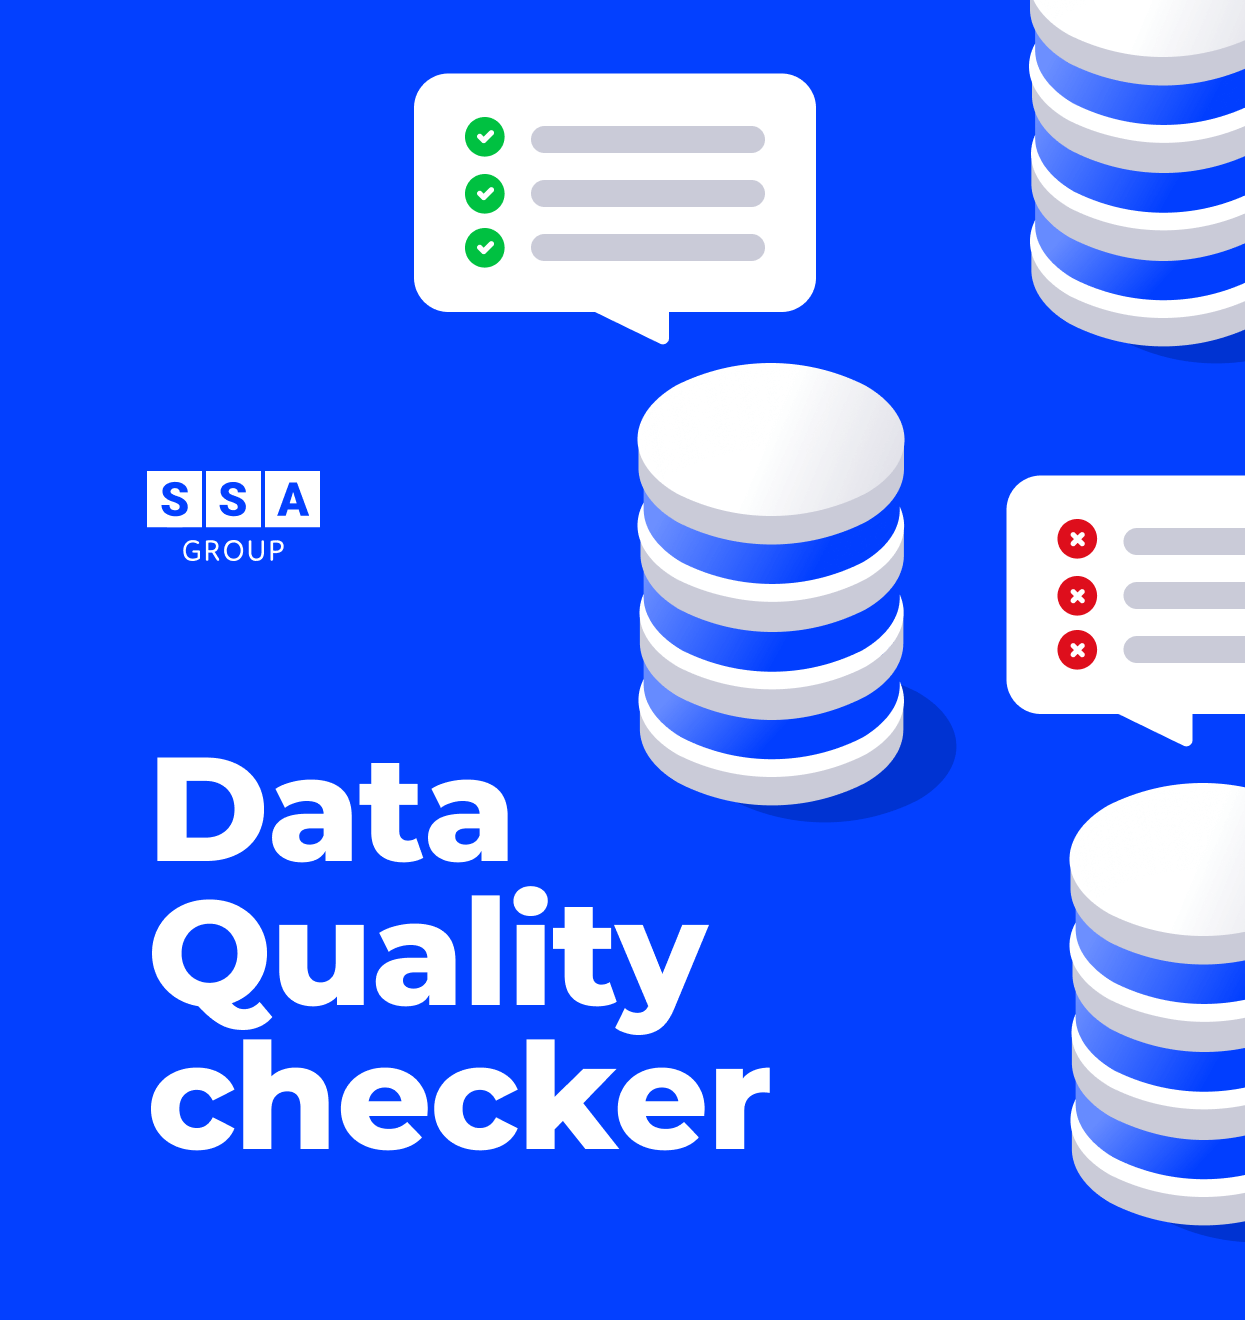 SSA Group introduces a new solution allowing to get insights into data quality – Data Quality checker  